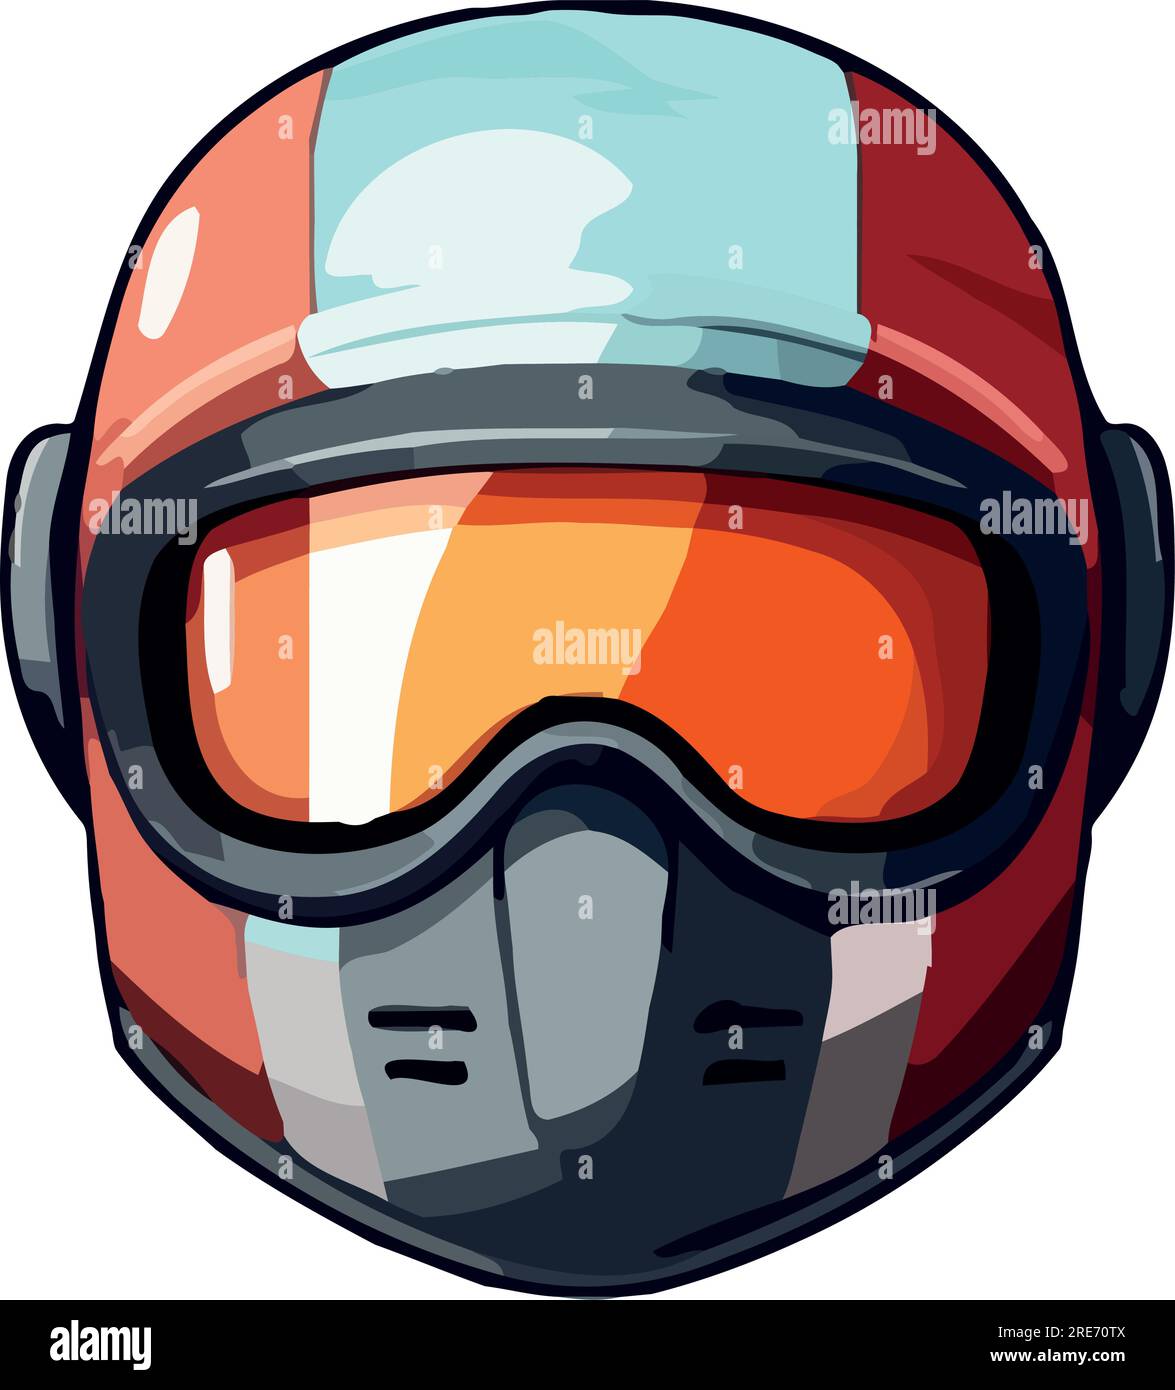 Adventure sports helmet for extreme activities over white Stock Vector